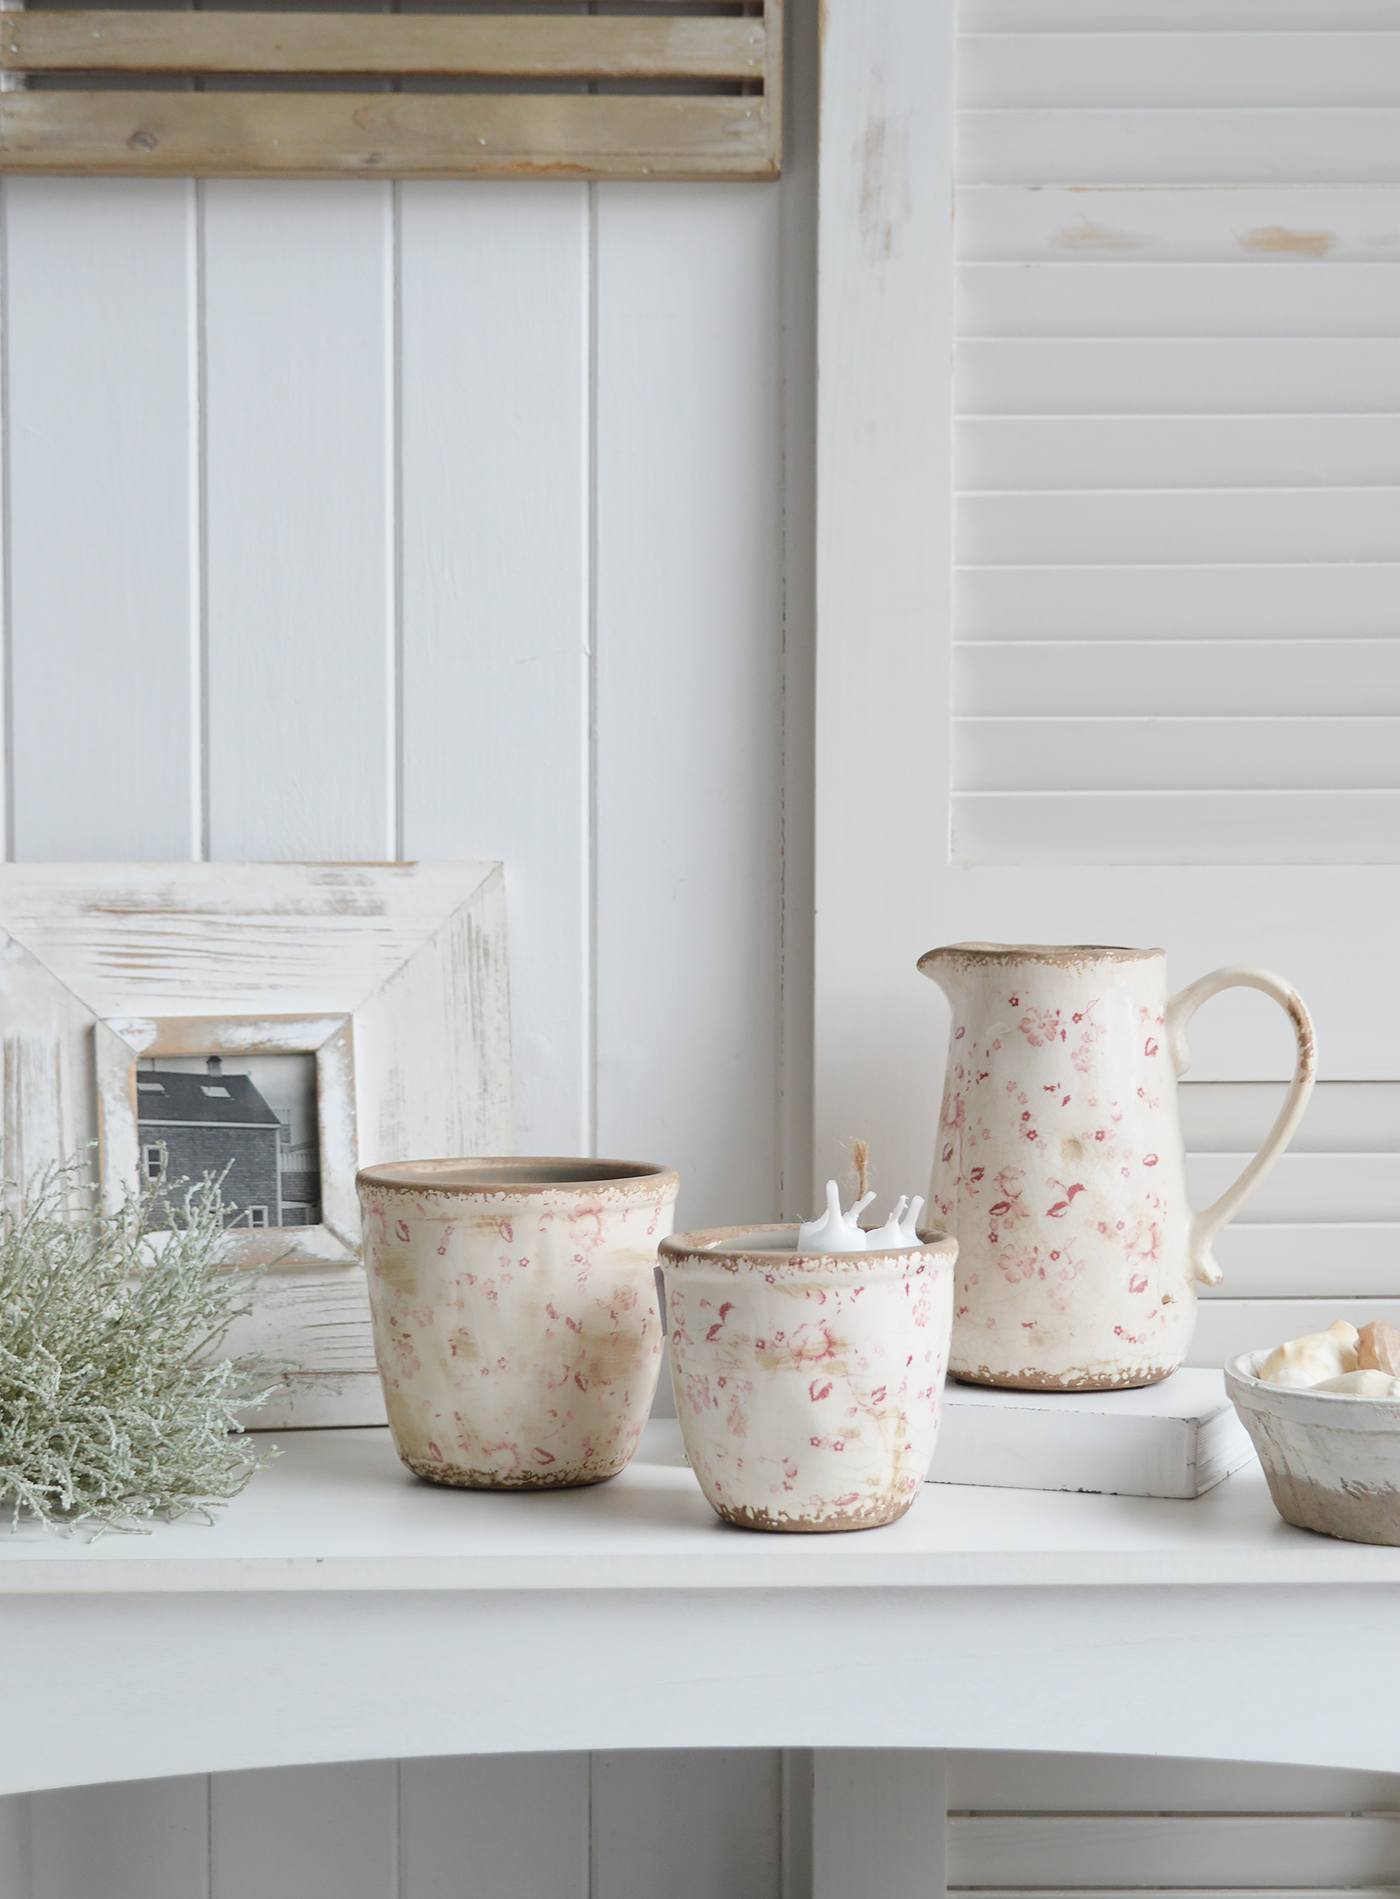 Campton pots in aged ceramic  in pinks and whites for New England, farmhouse,  Country and coastal homes and interior decor